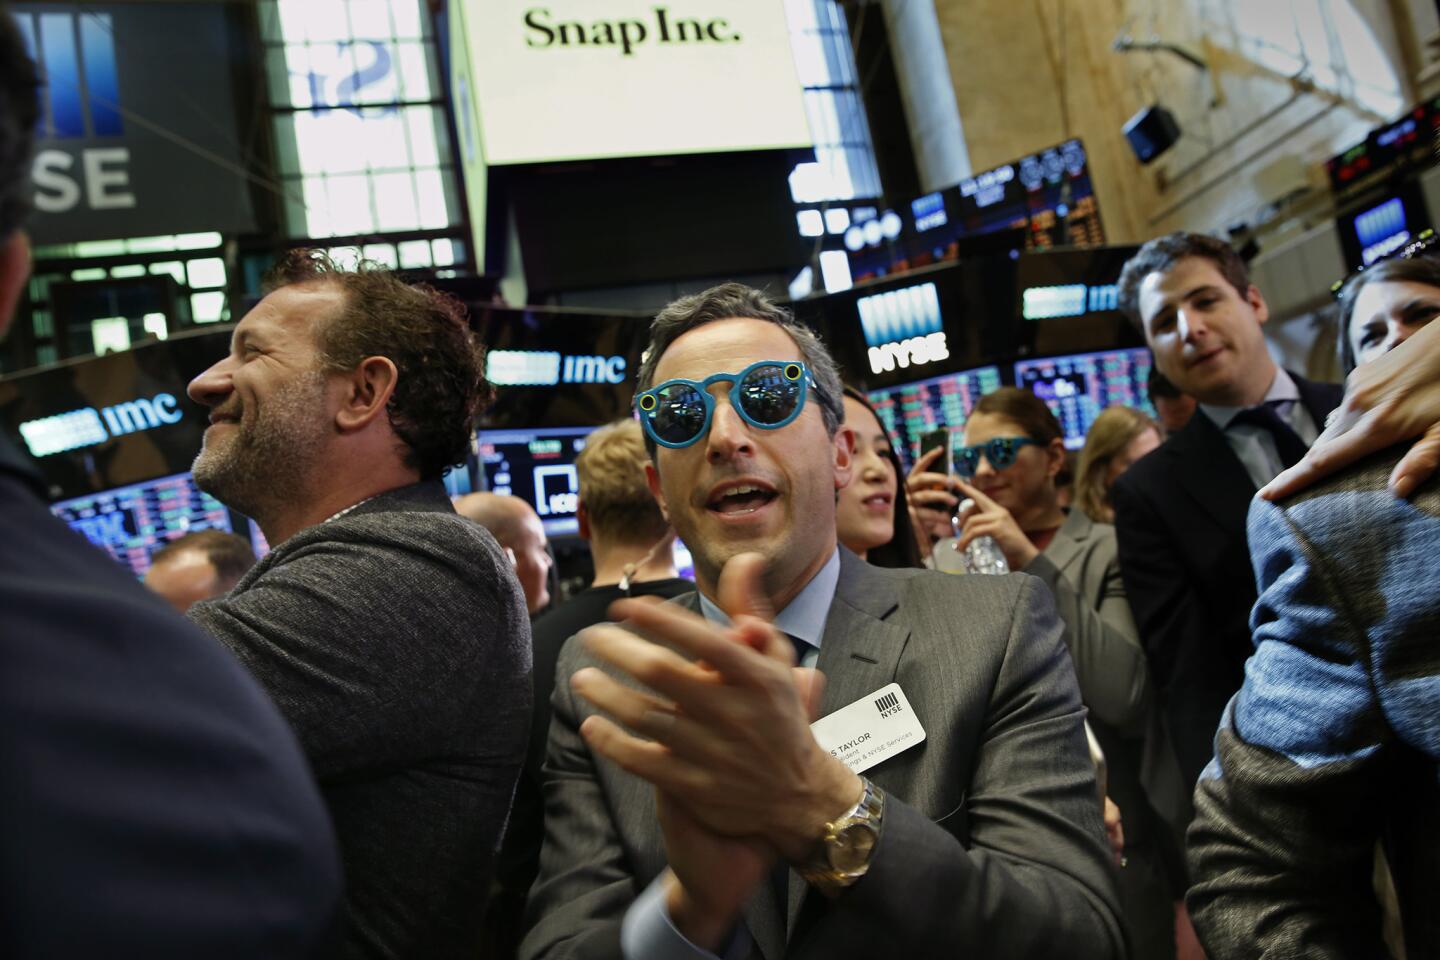 Wearing glasses by Snap, Chris Taylor, Vice President of the NYSE Listings an NYSE Services and others celebrate the listing of Snap Inc. on the New York Stock Exchange.